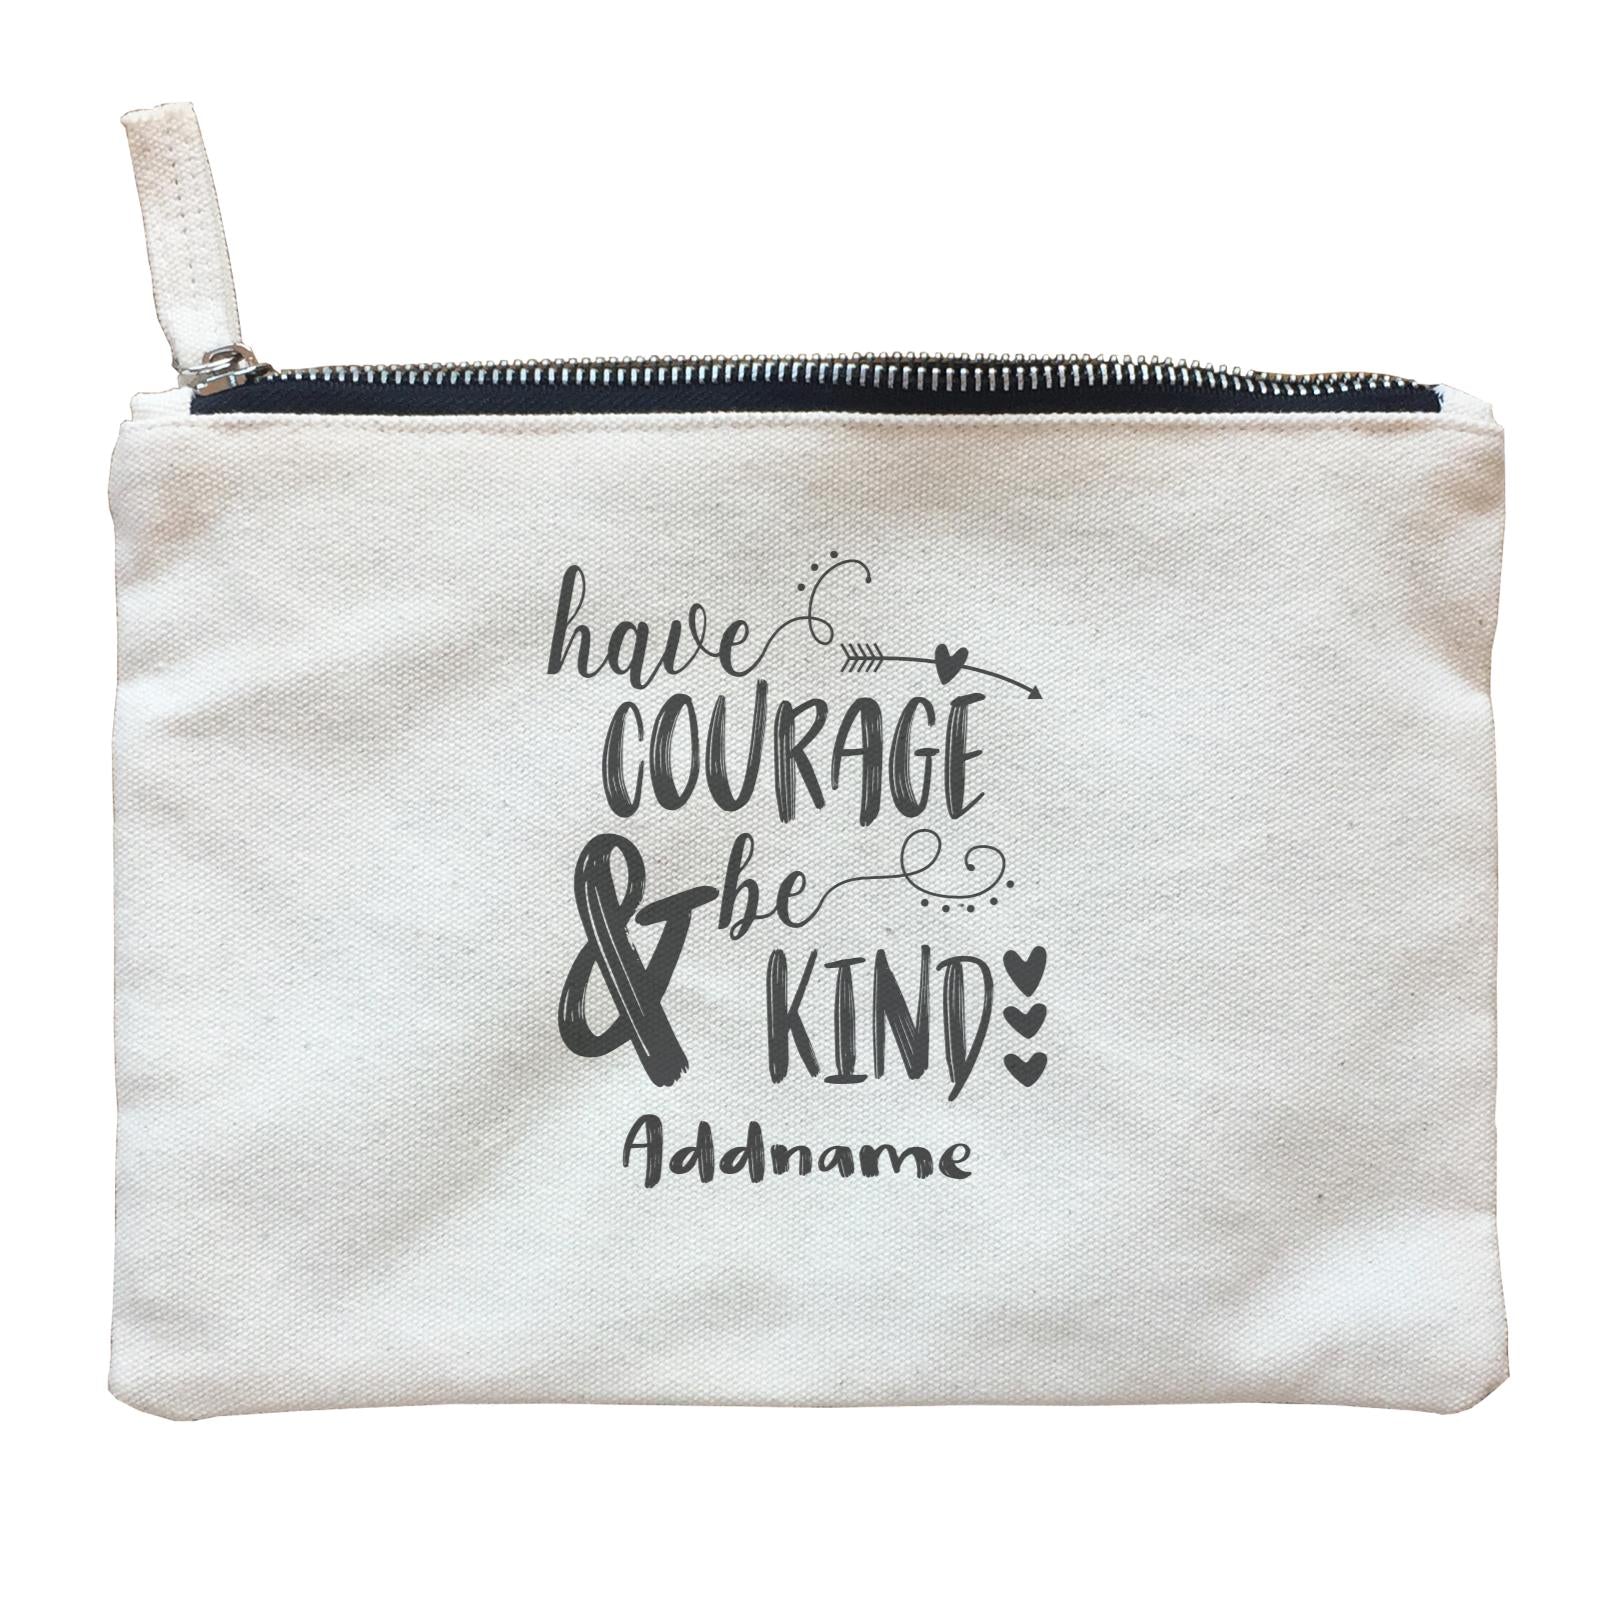 Inspiration Quotes Have Courage And Be Kind Addname Zipper Pouch